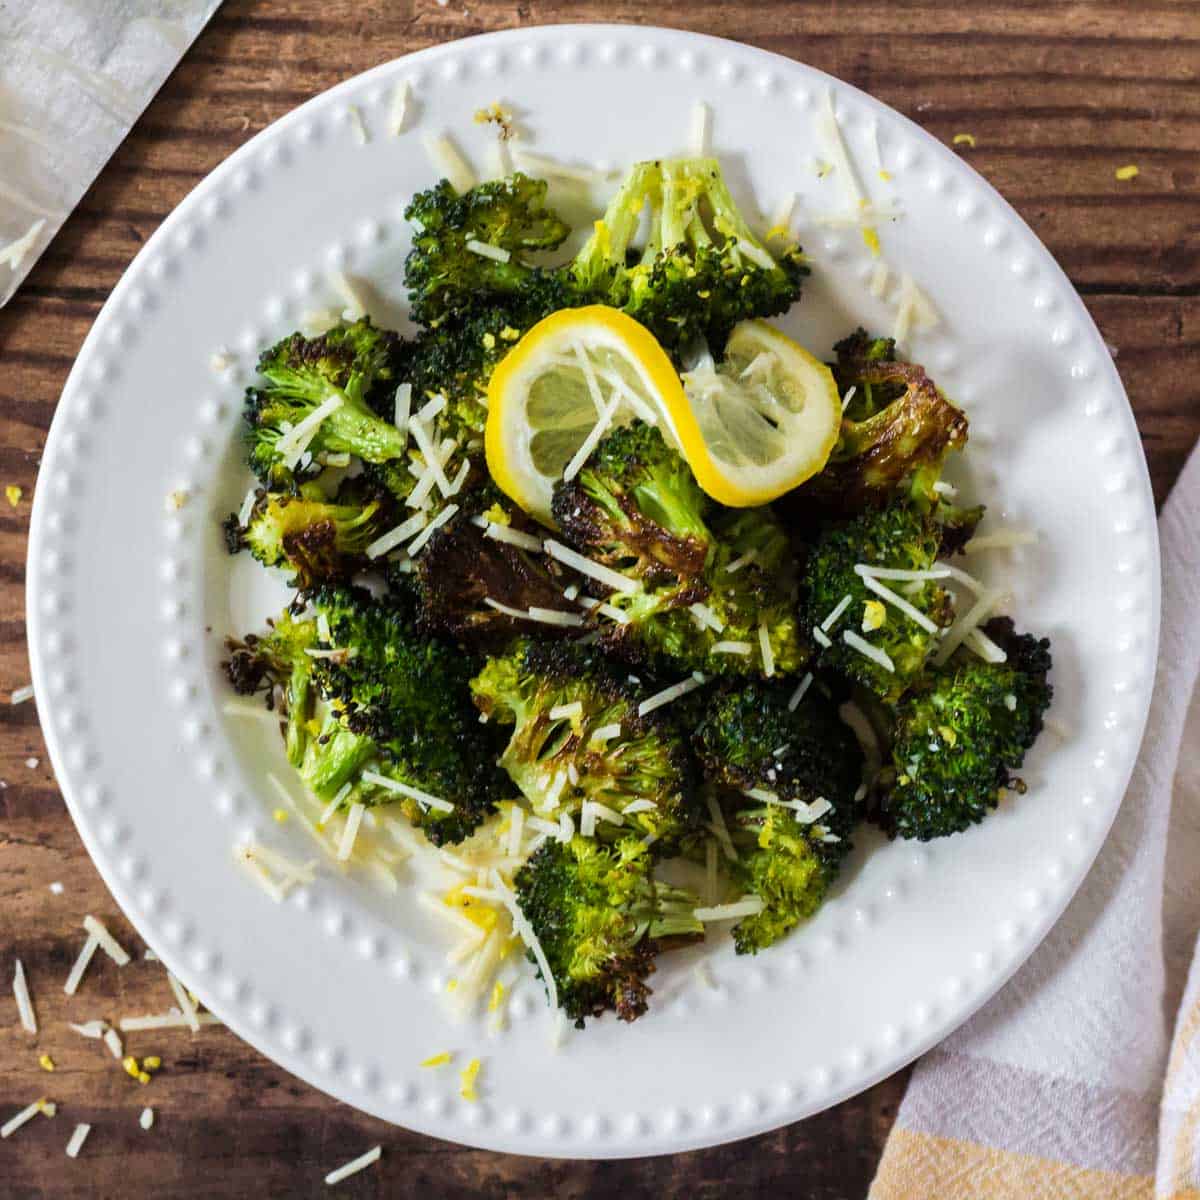 A plate of roasted broccoli